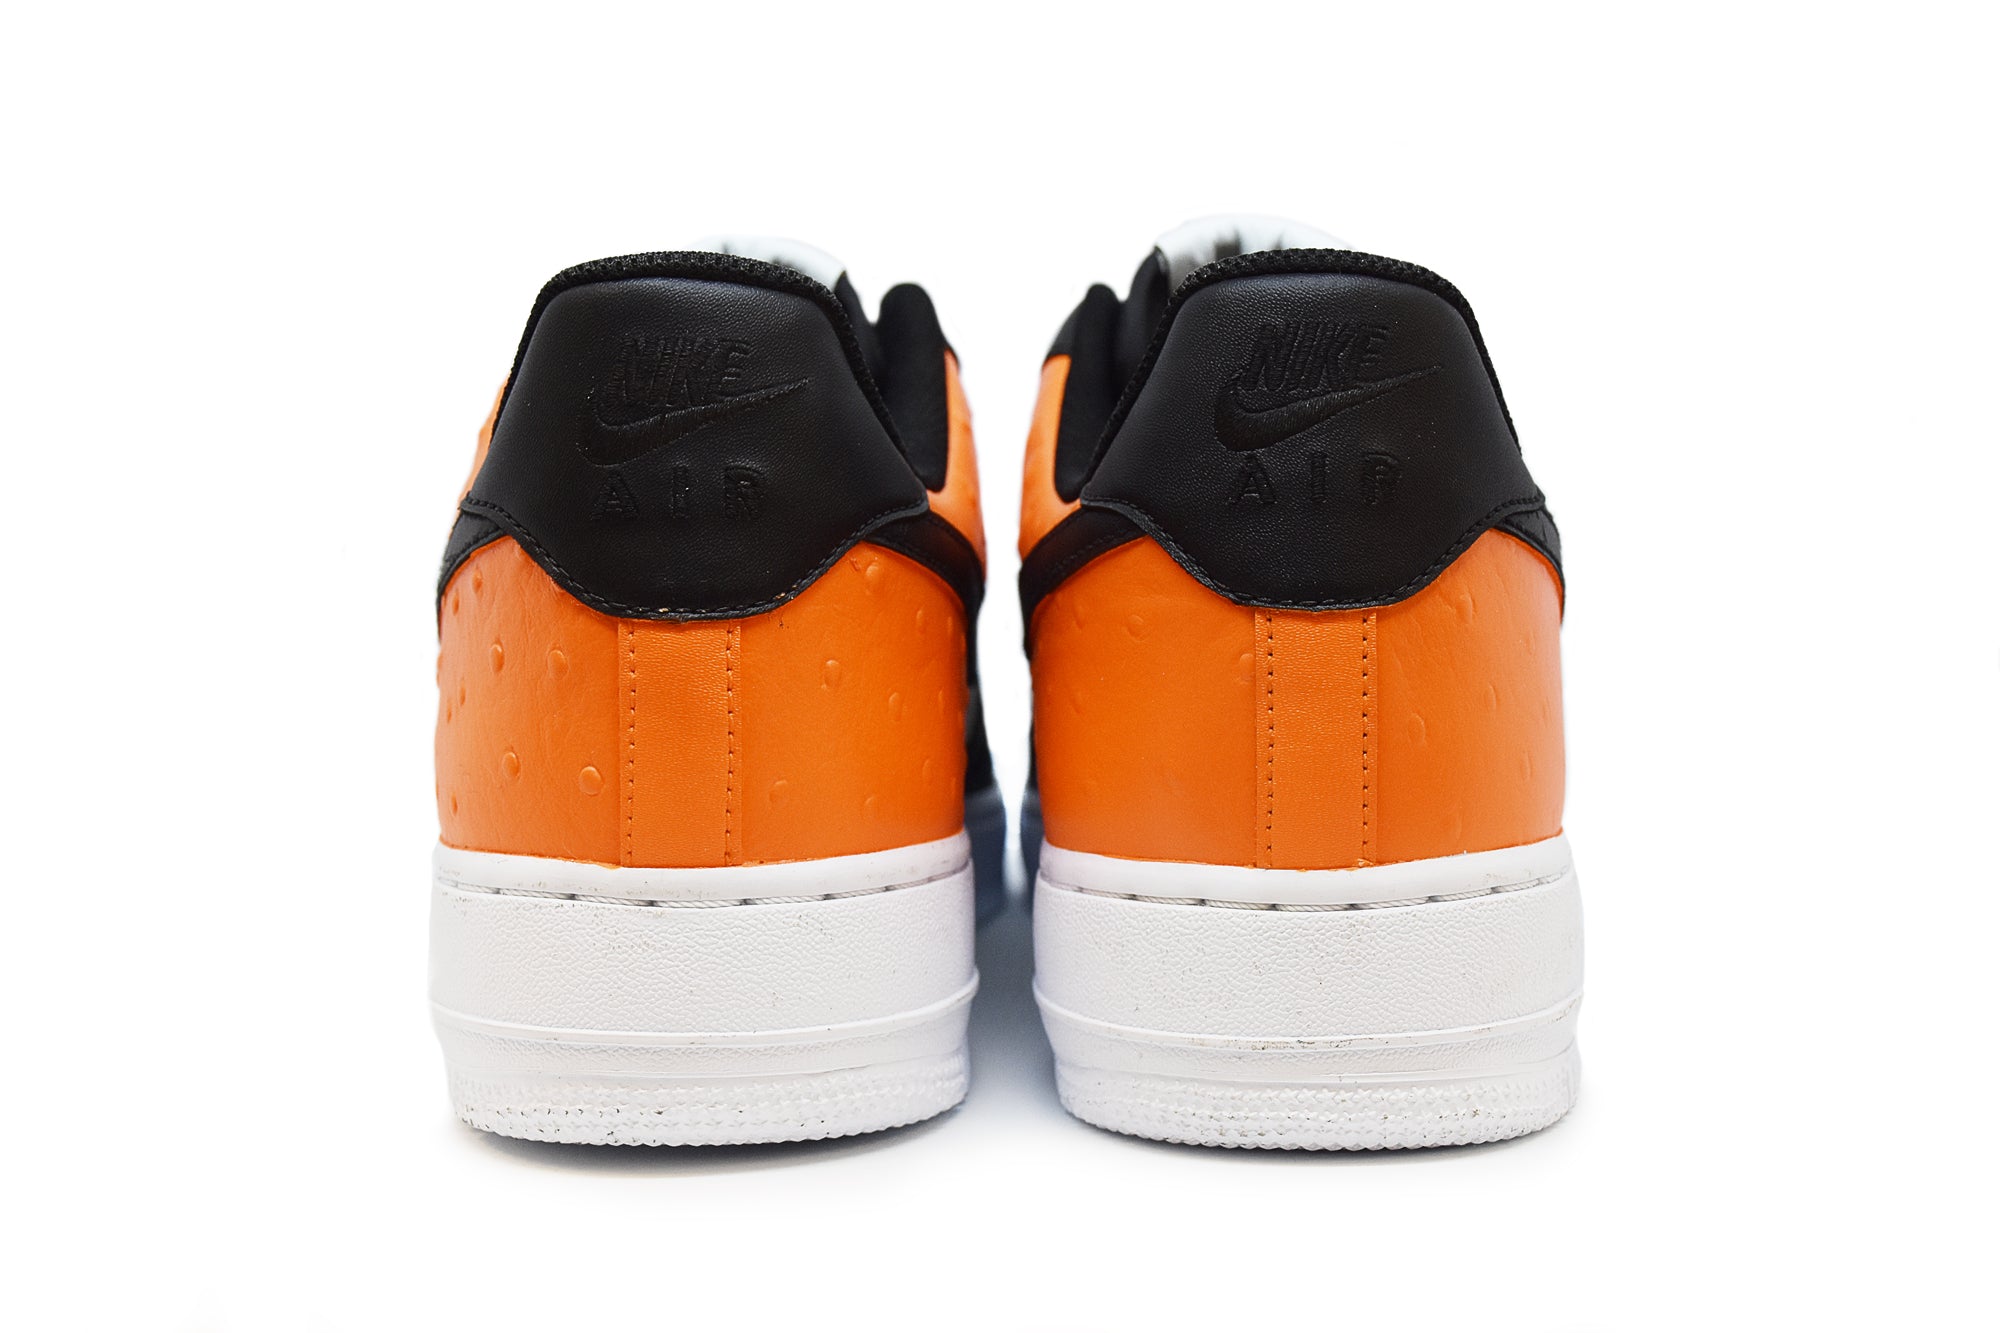 Ostrich Air Force 1 Low "Shattered Backboard" by TailorMade Customs